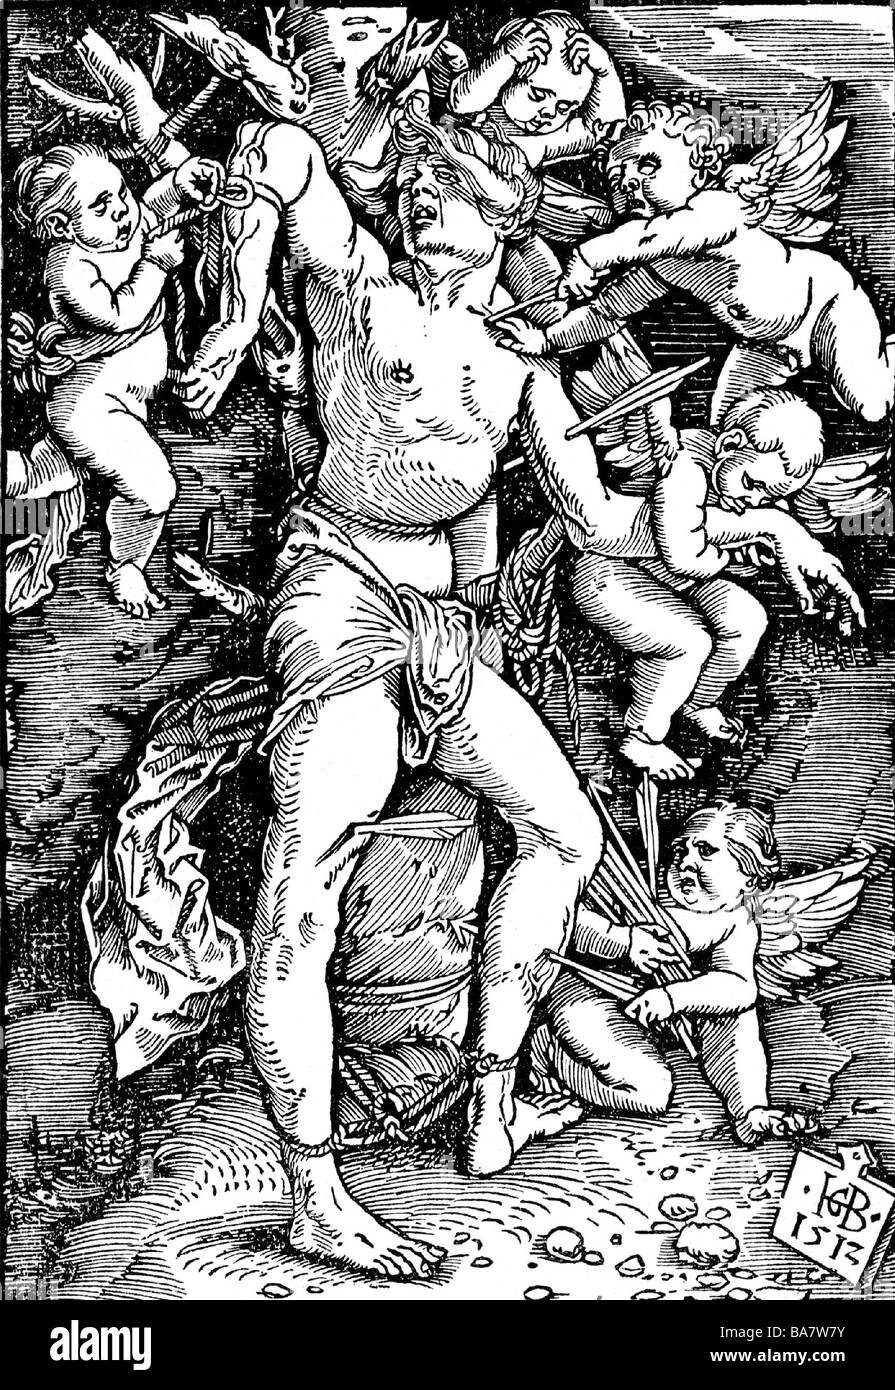 Sebastian, saint, martyr, + circa 288, death, is being freed from the arrows by angels, woodcut by Hans Baldung Grien, 1512, Stock Photo